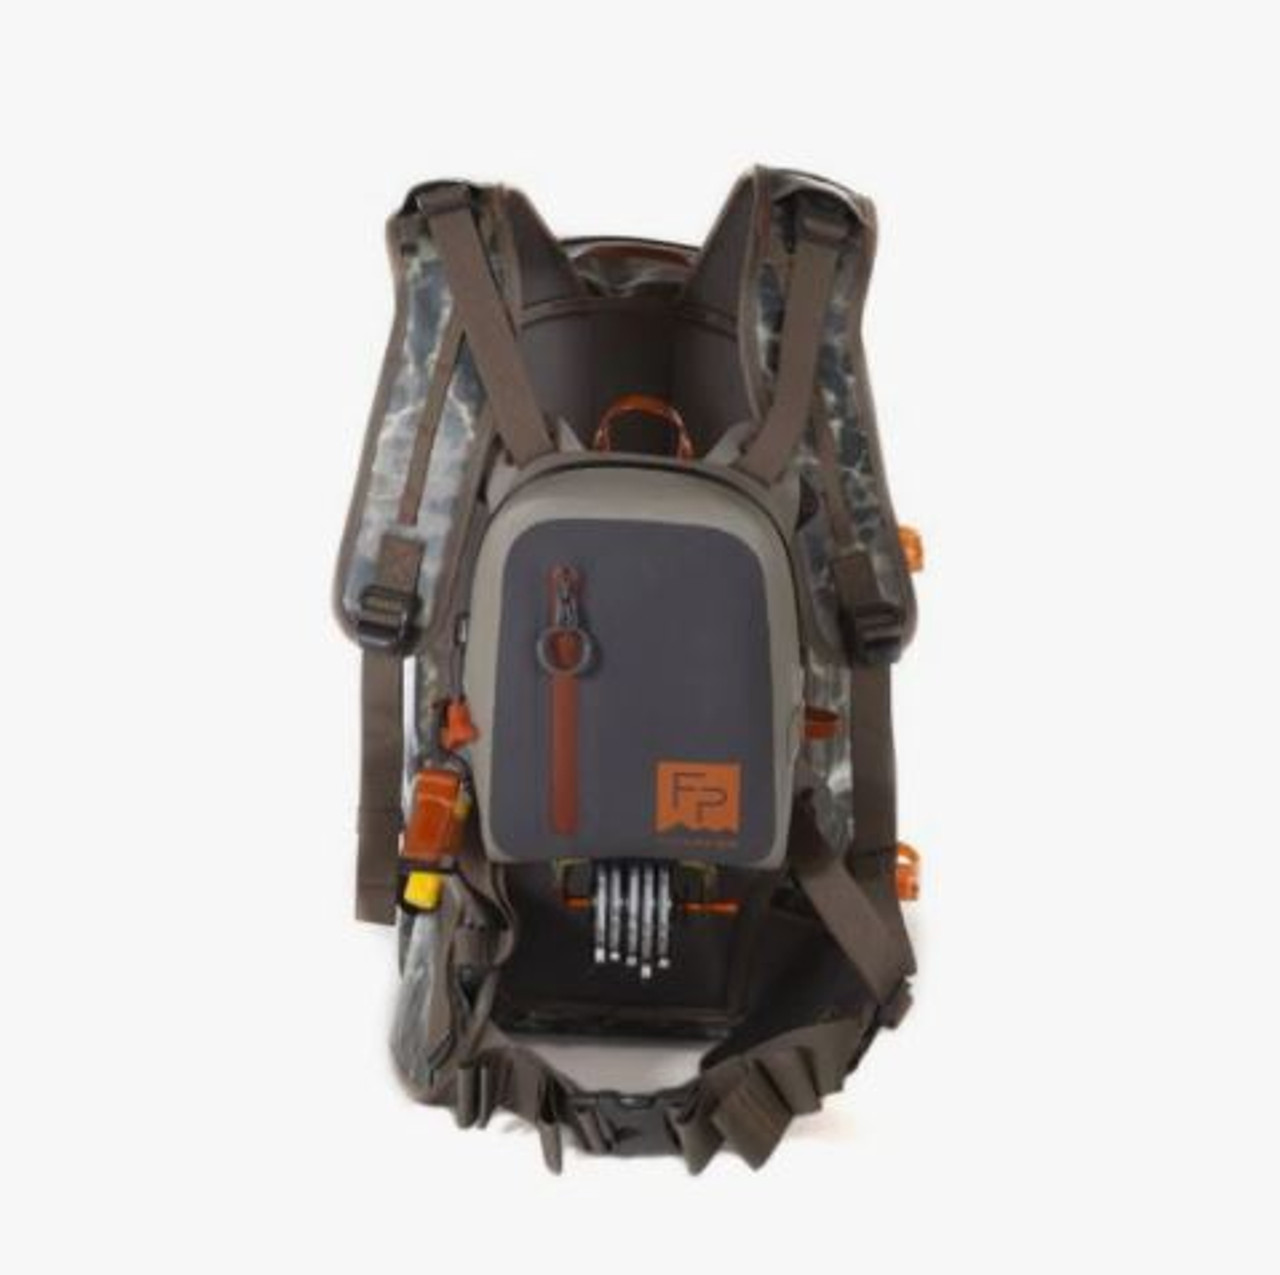 Thunderhead Submersible Backpack - Eco Riverbed Camo